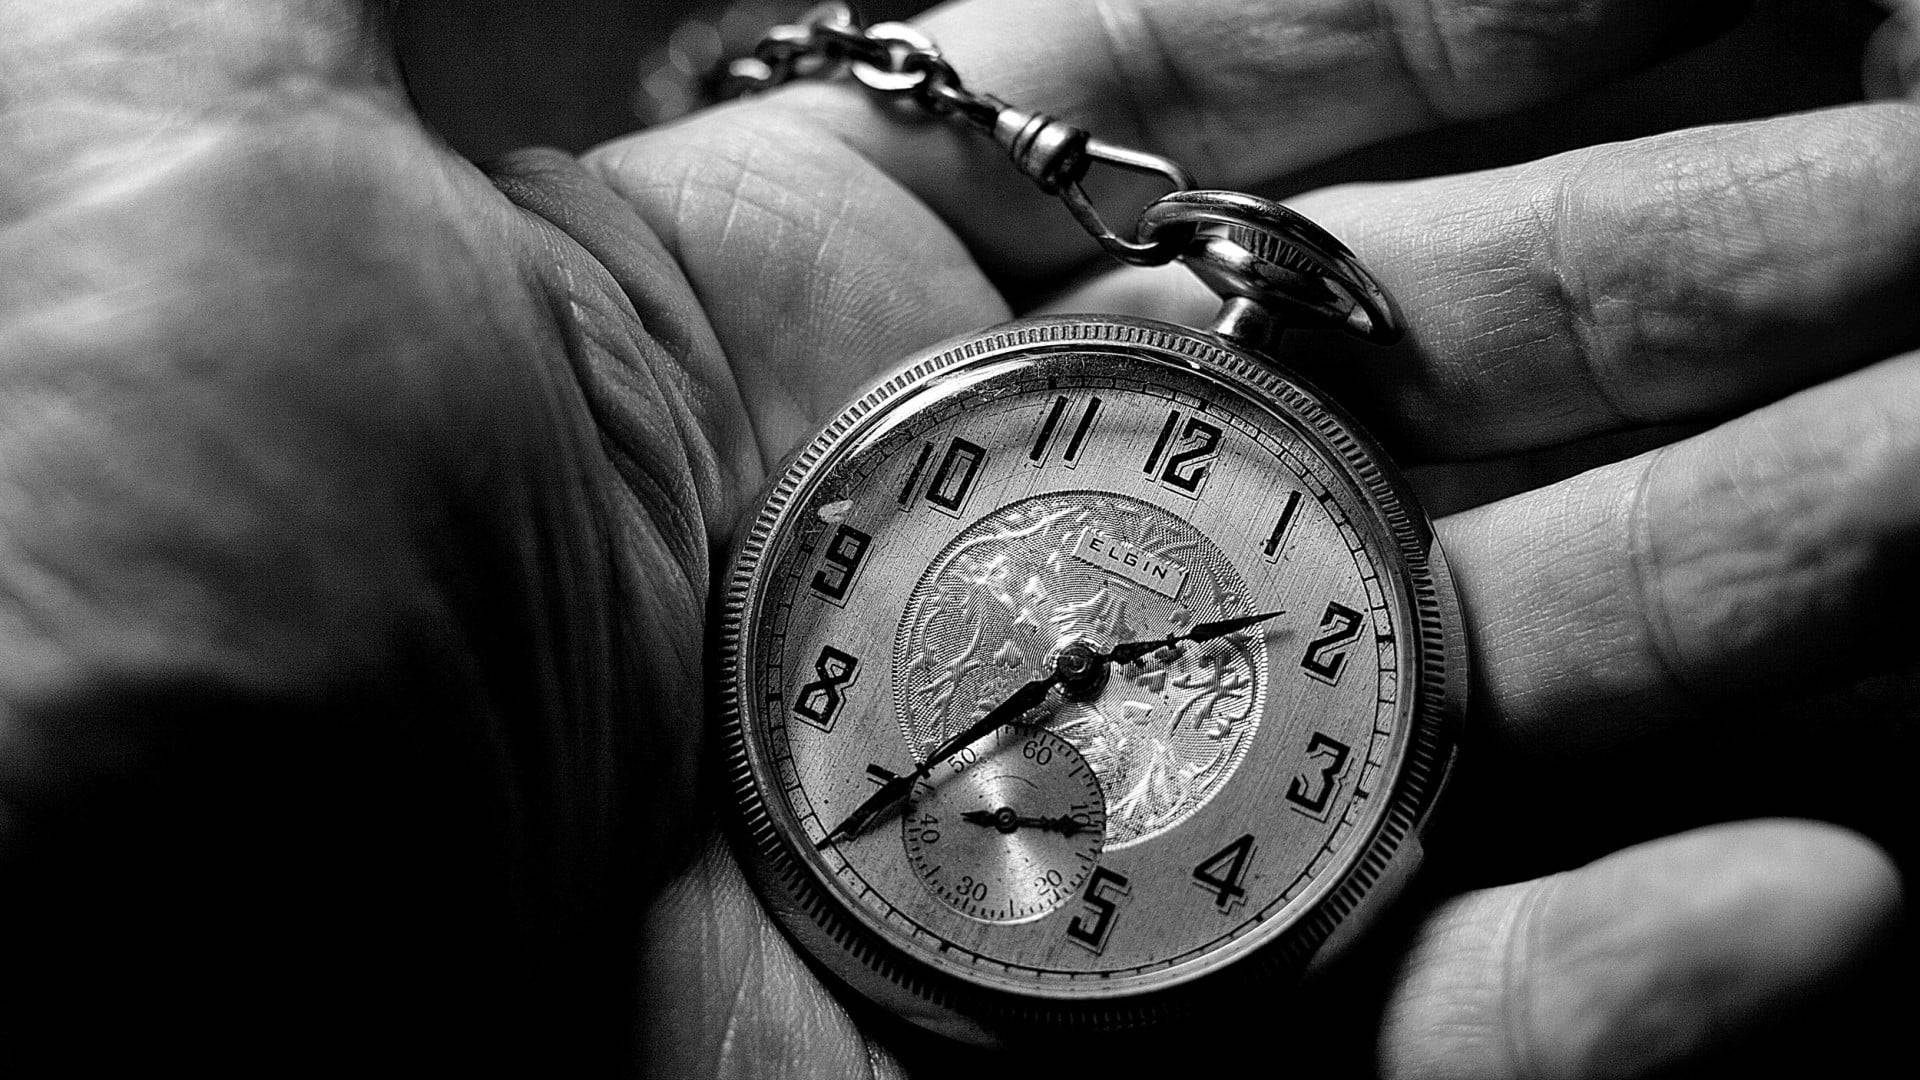 Palm With Pocket Watch Tiempo Background Wallpaper